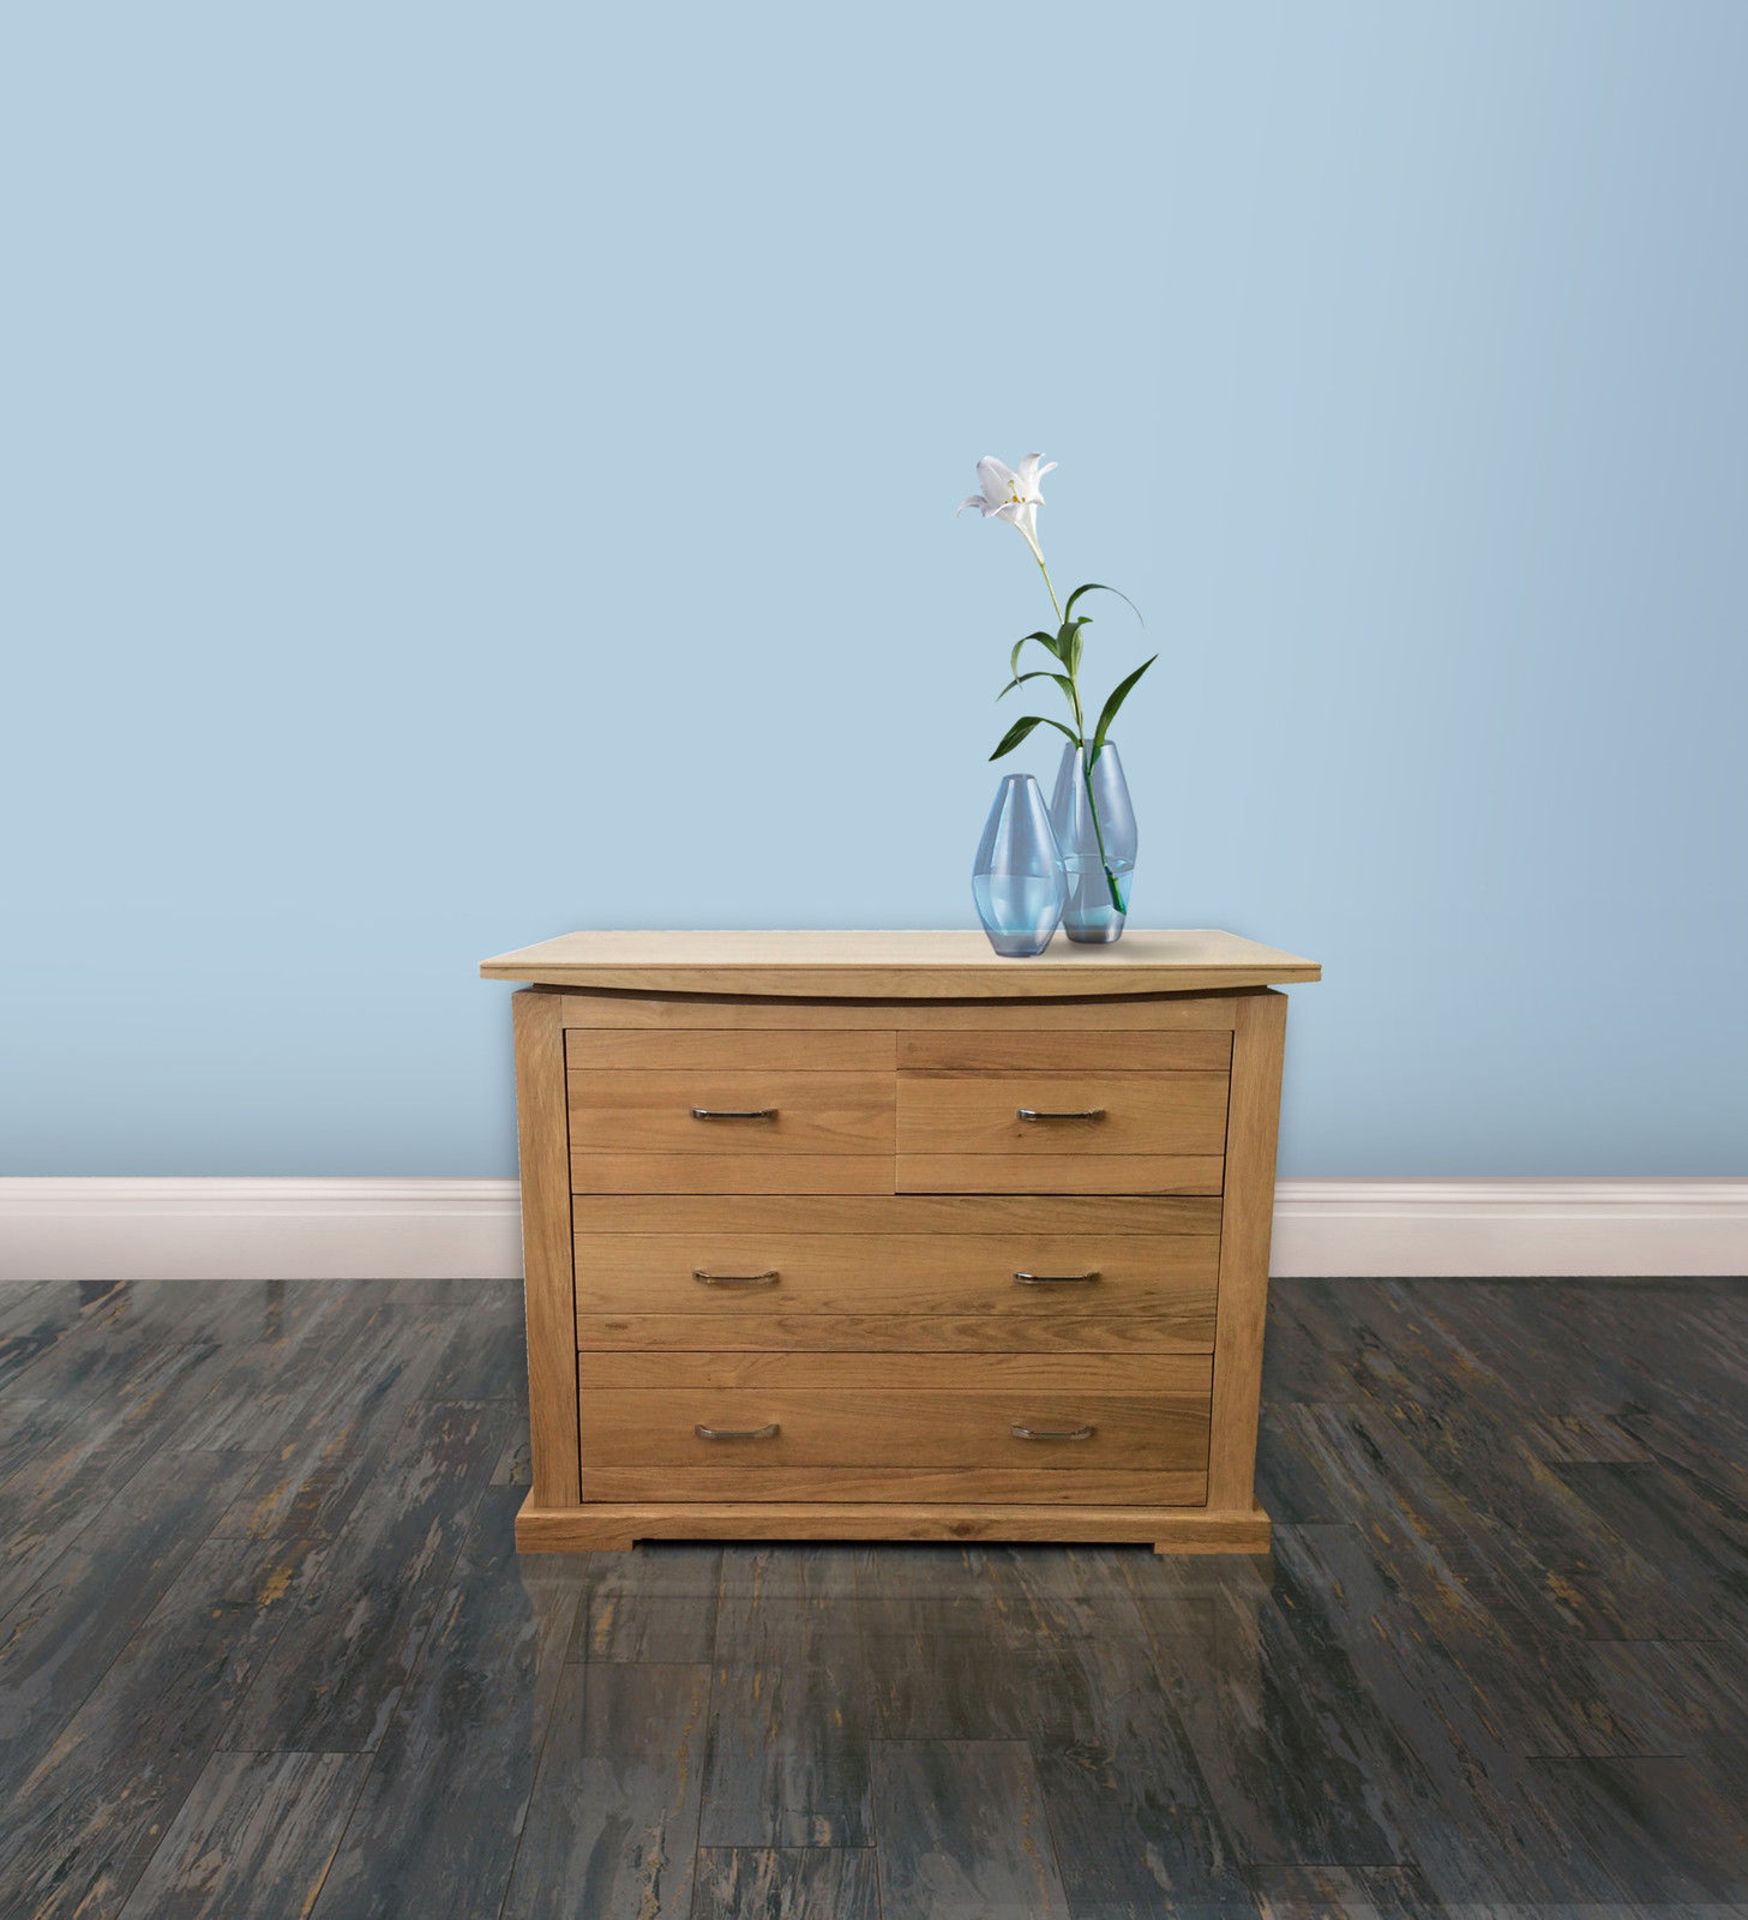 1 BRAND NEW BOXED RRP £399.99 MATLOCK 2+2 CHEST OF DRAWERS IN SOLID OAK (ASSEMBLED IN BOX)